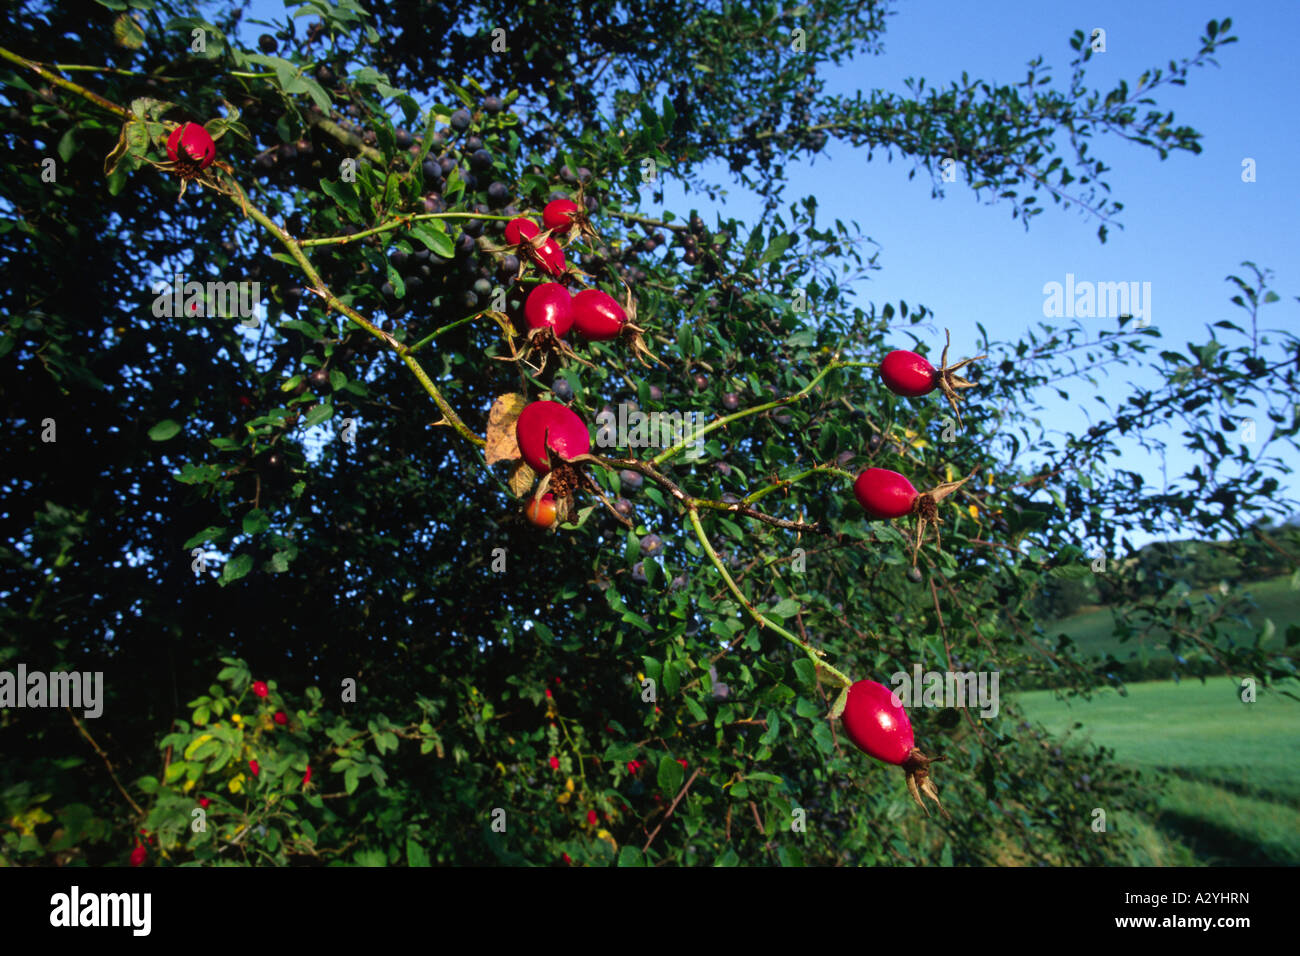 Rosehips of Sherard's Downy Rose (Rosa sherardii) growing in a hedge on an Organic Farm. Powys, Wales, UK. Stock Photo